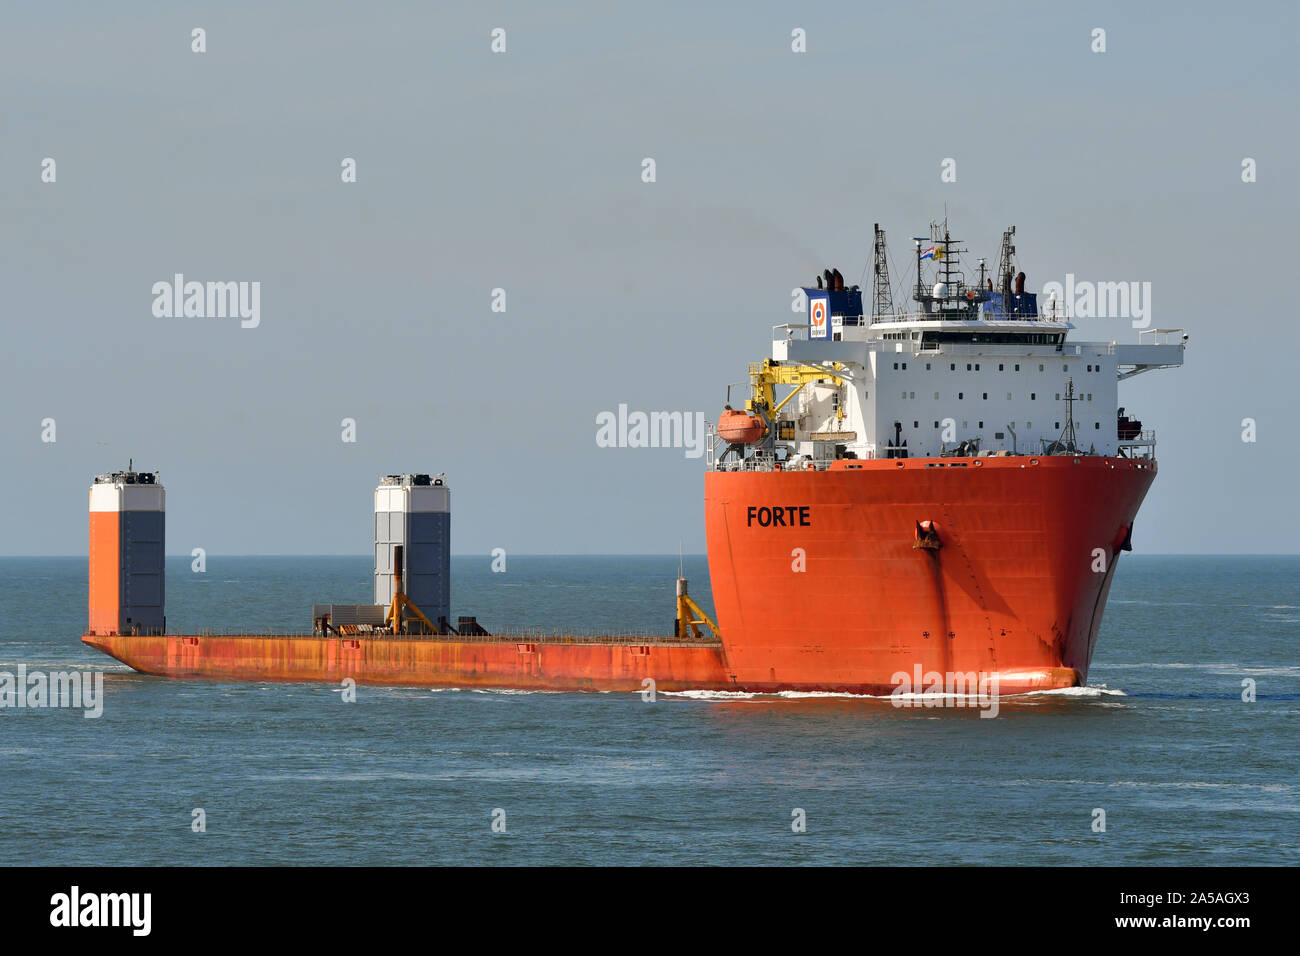 Heavy Load Carrier Forte Stock Photo